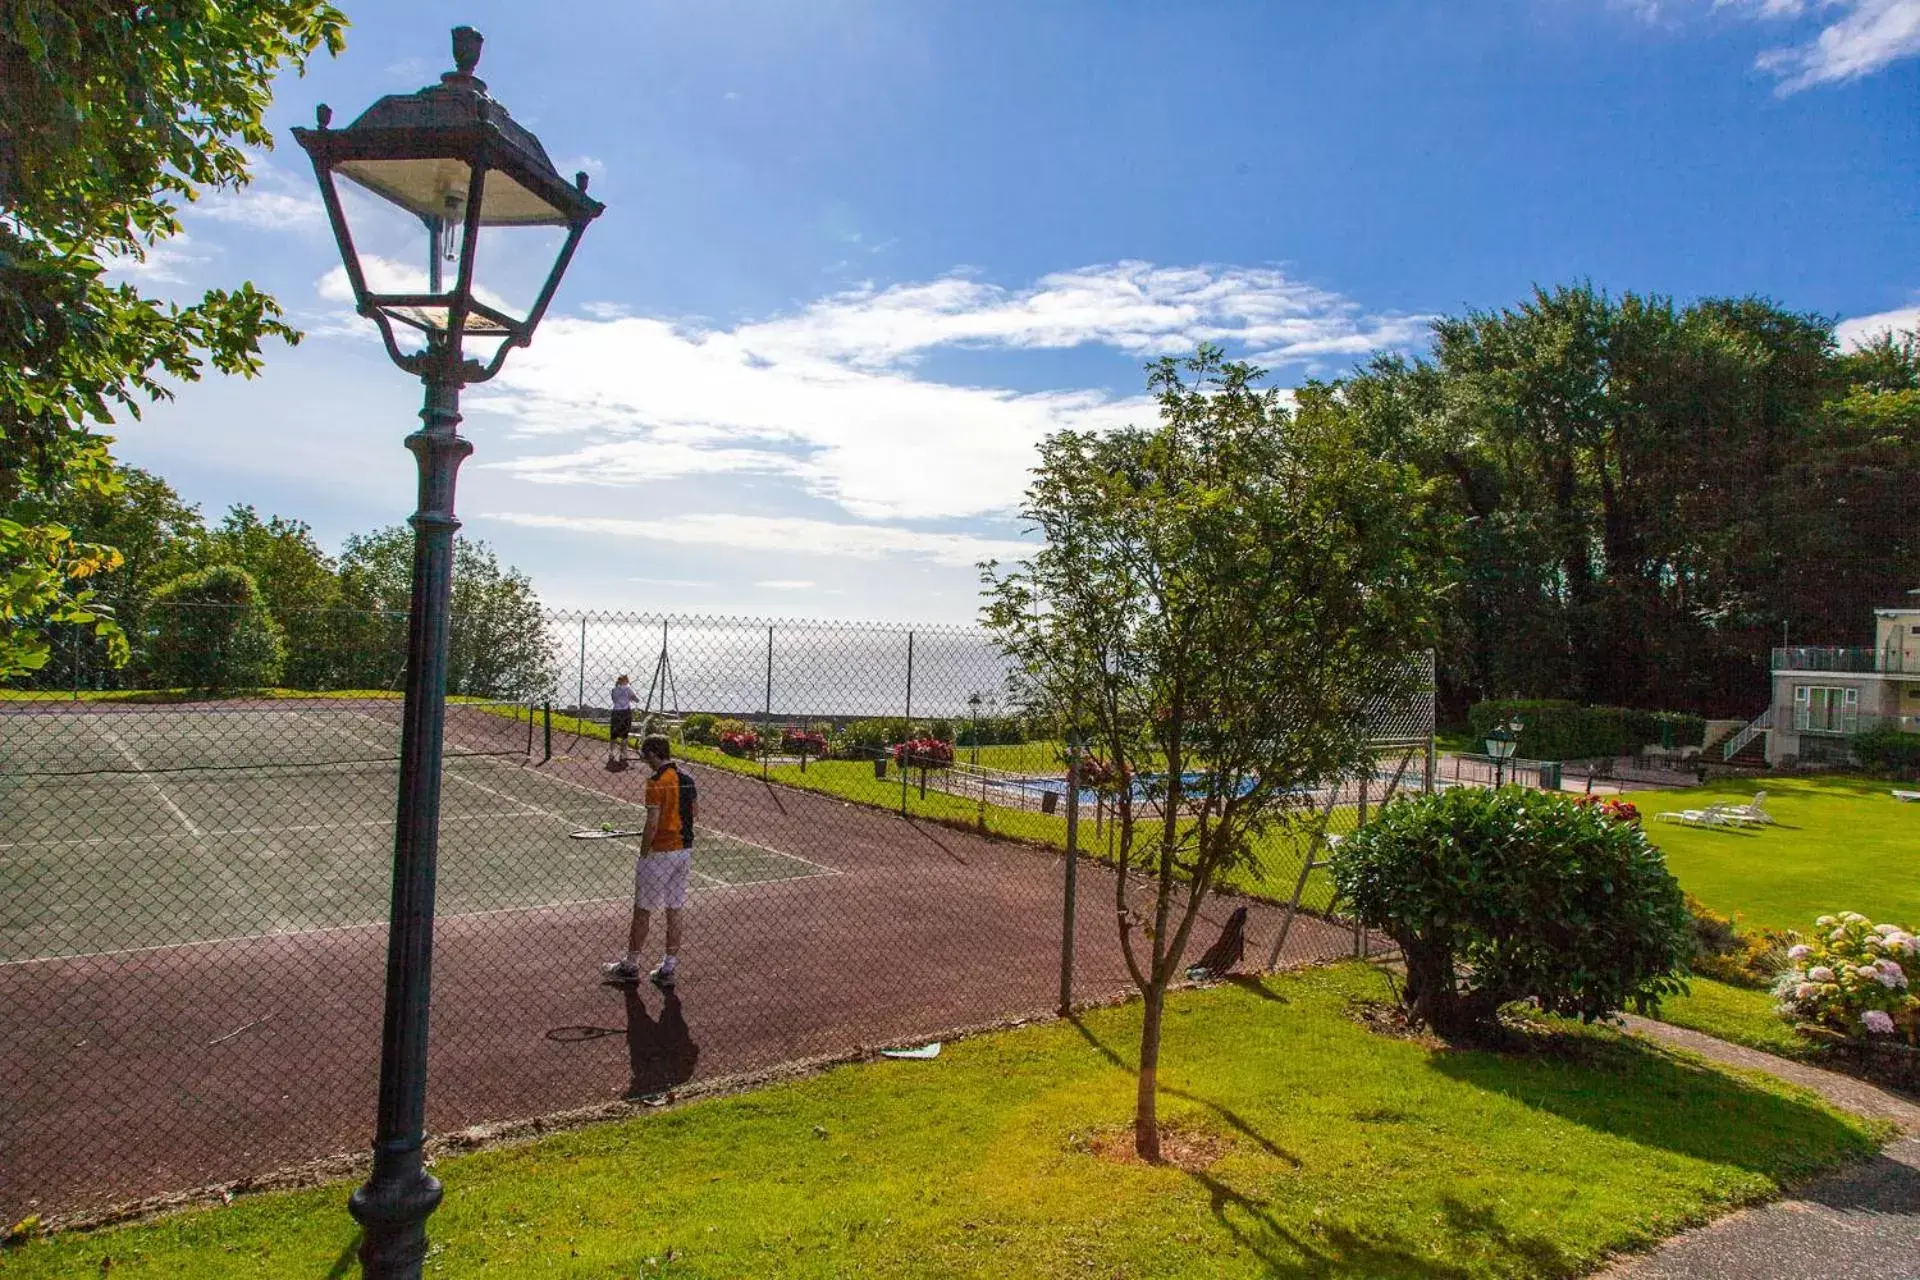 Tennis court, Other Activities in Langstone Cliff Hotel